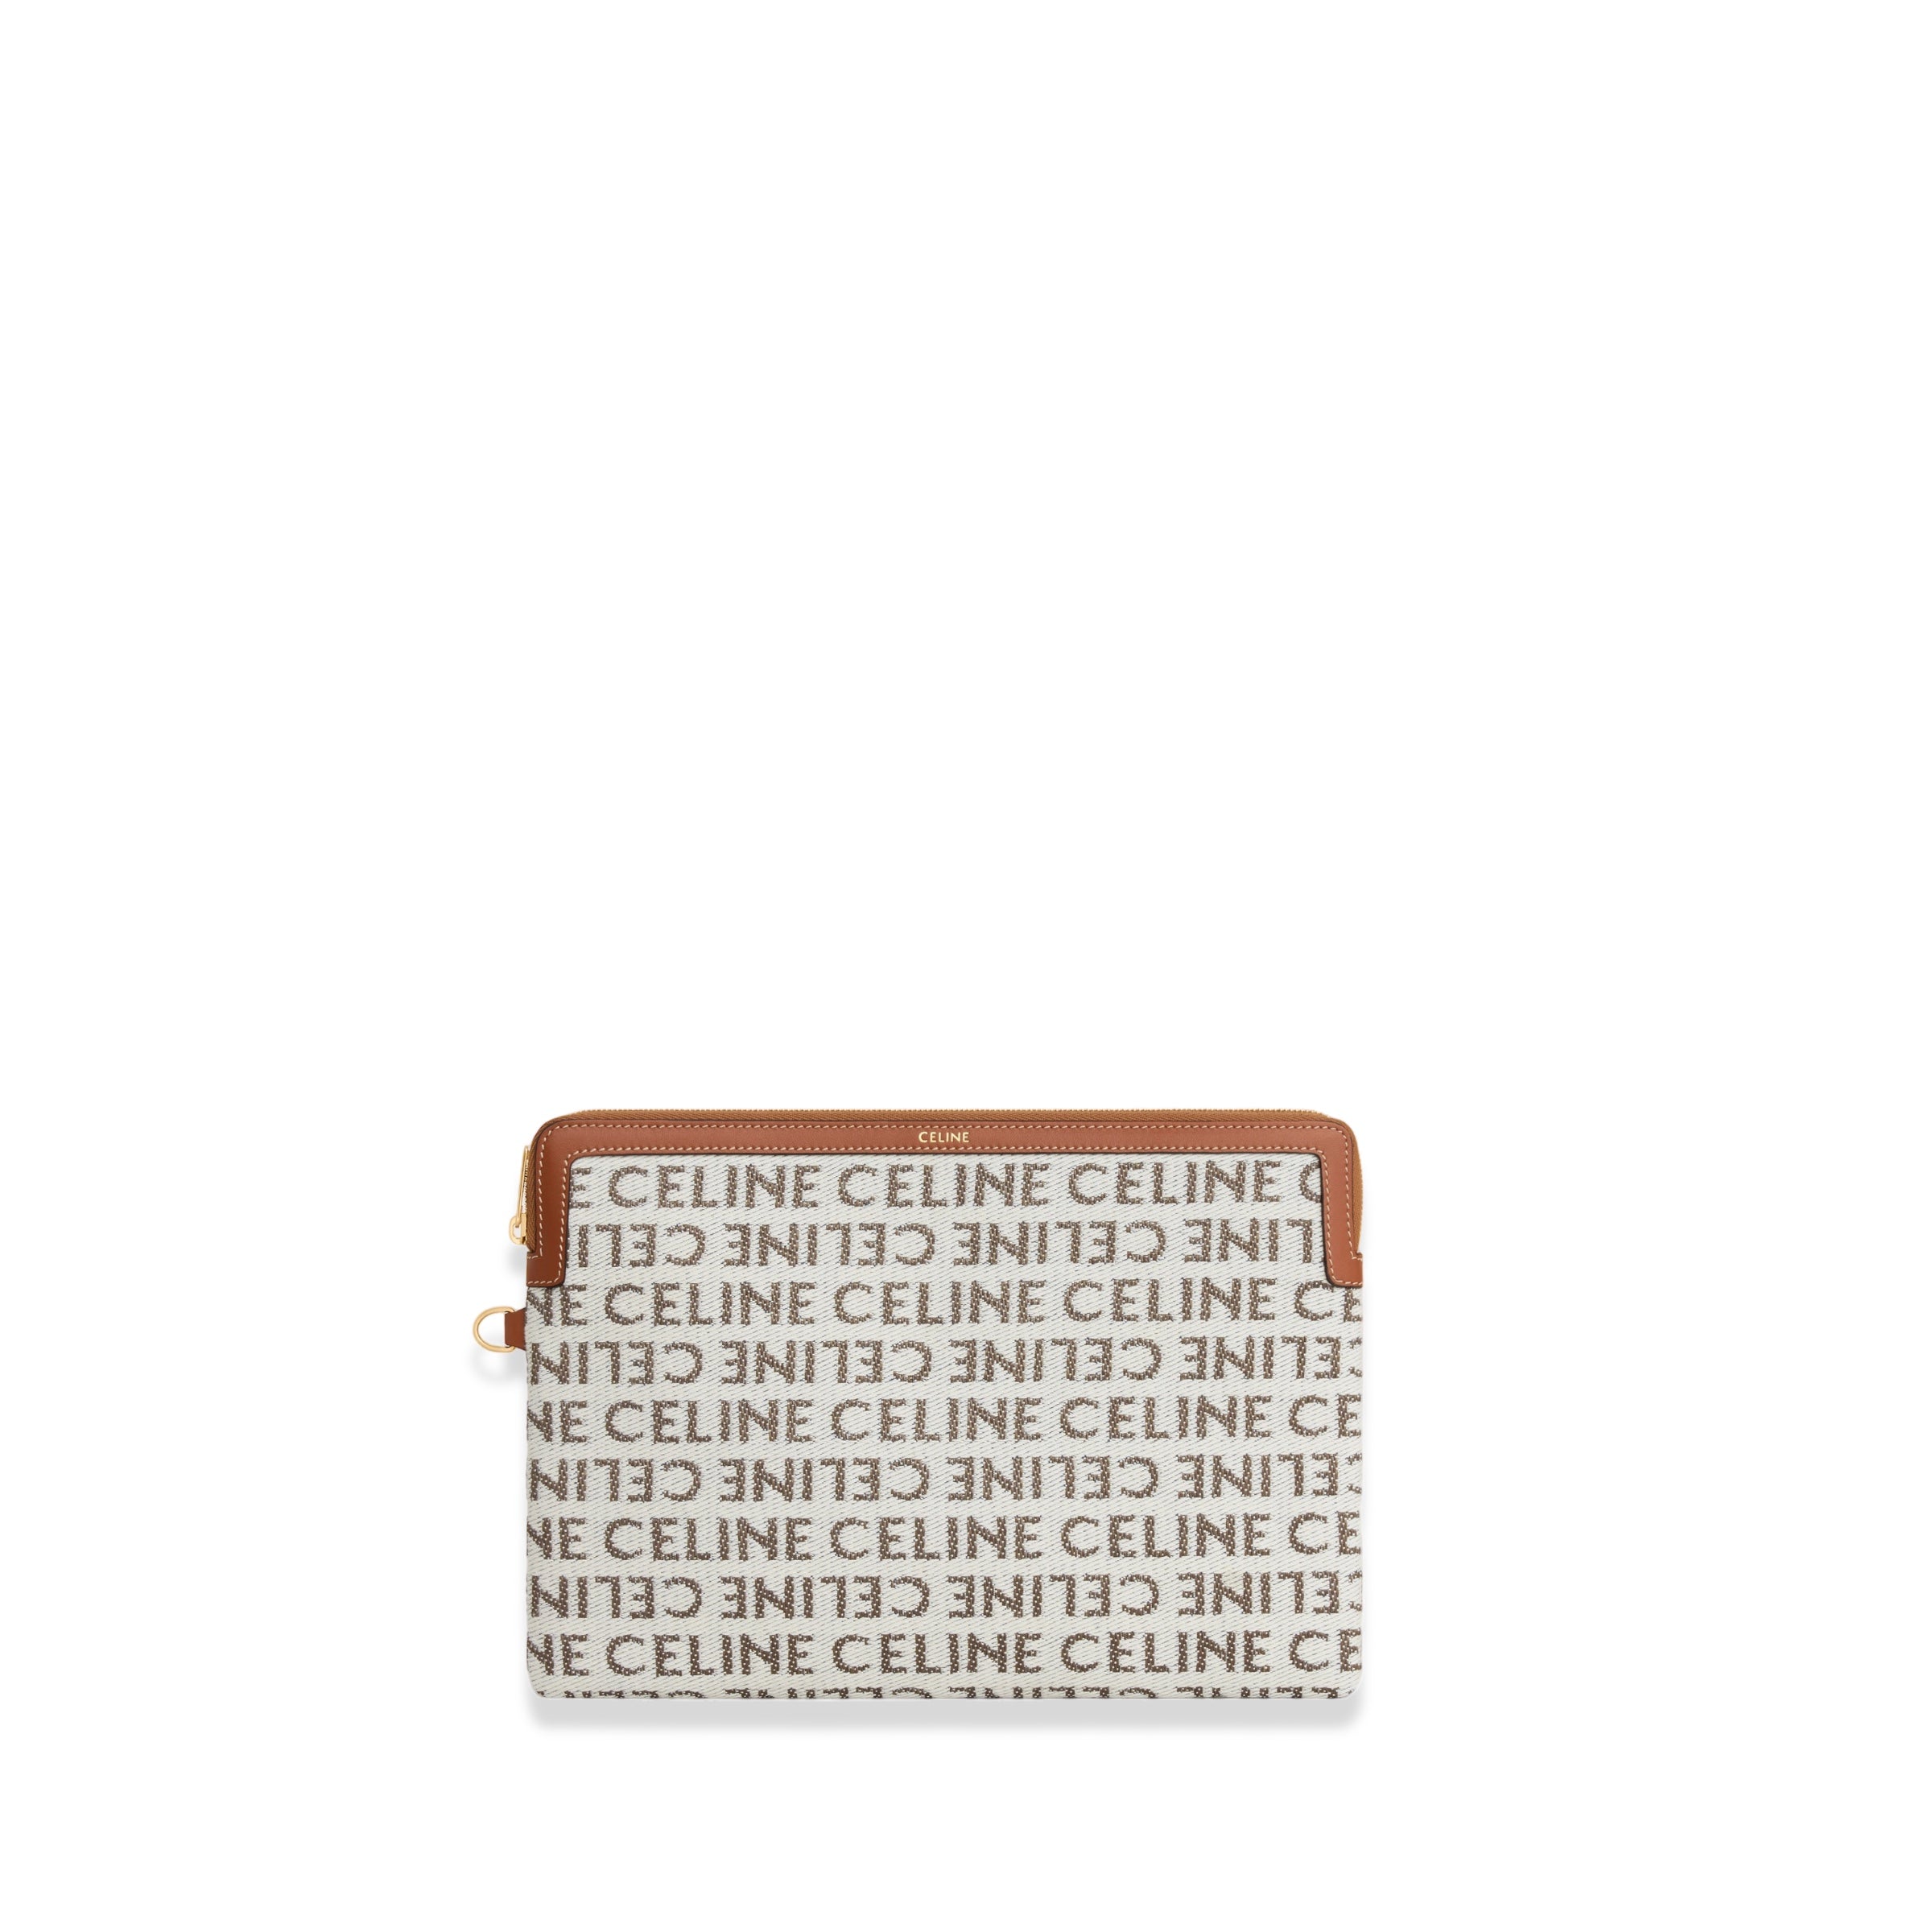 Celine - Small Signature logo Pouch With Strap